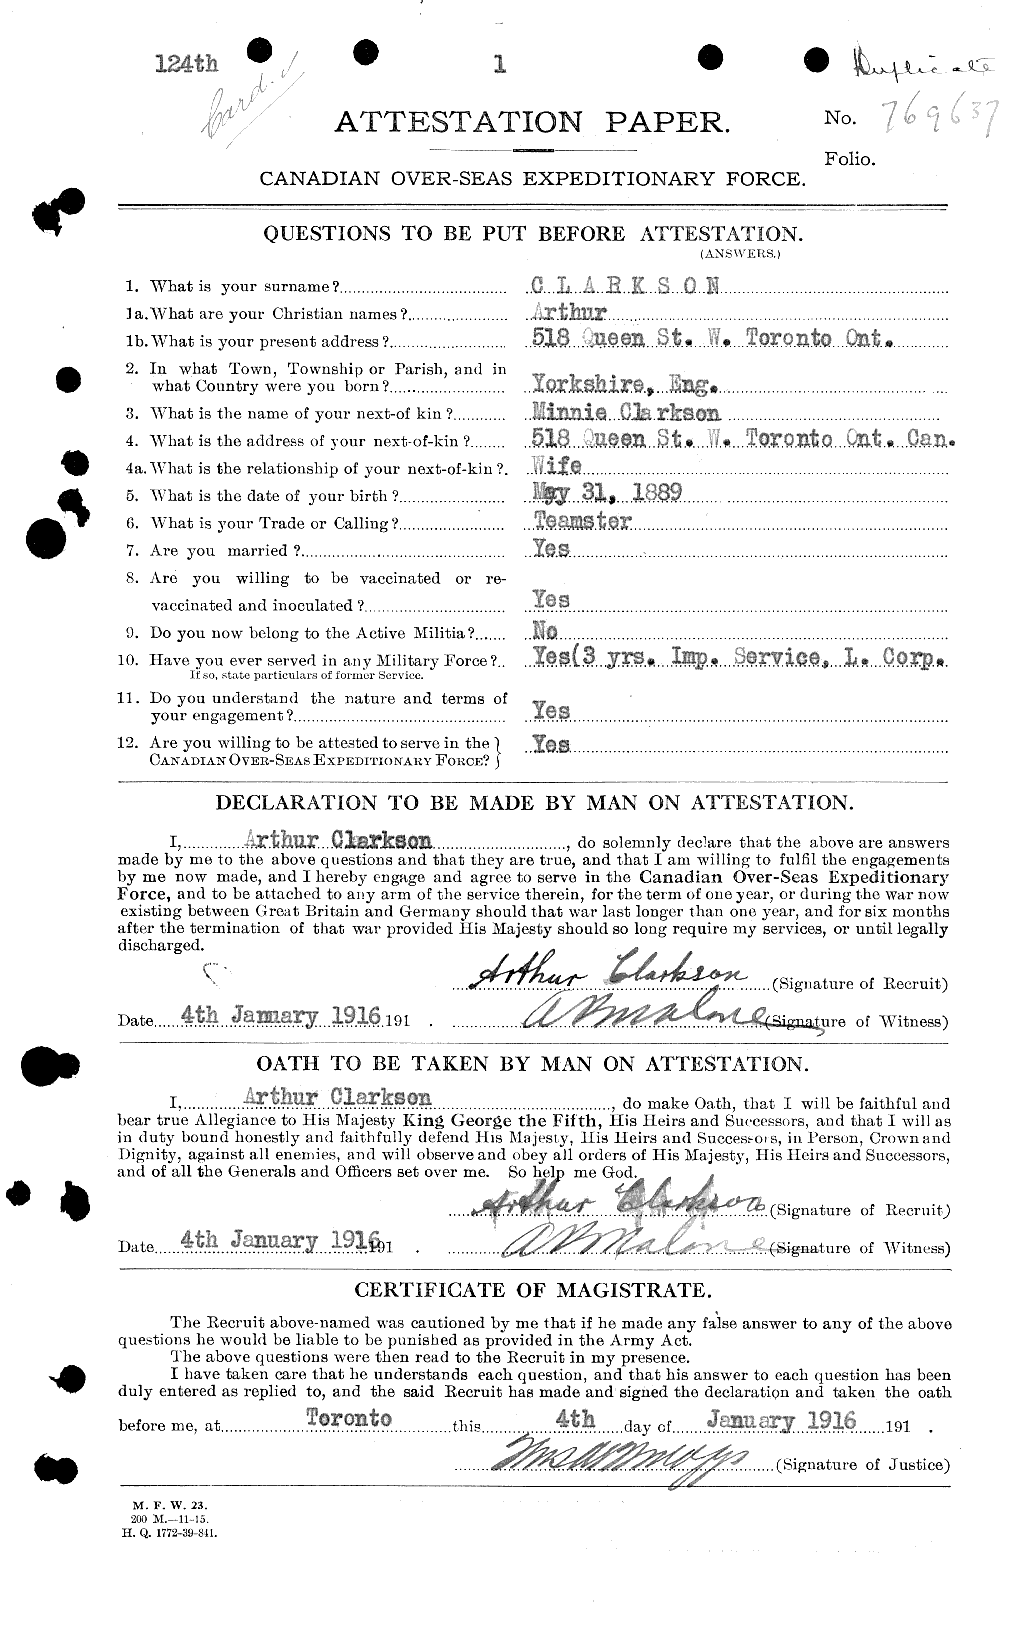 Personnel Records of the First World War - CEF 023616a